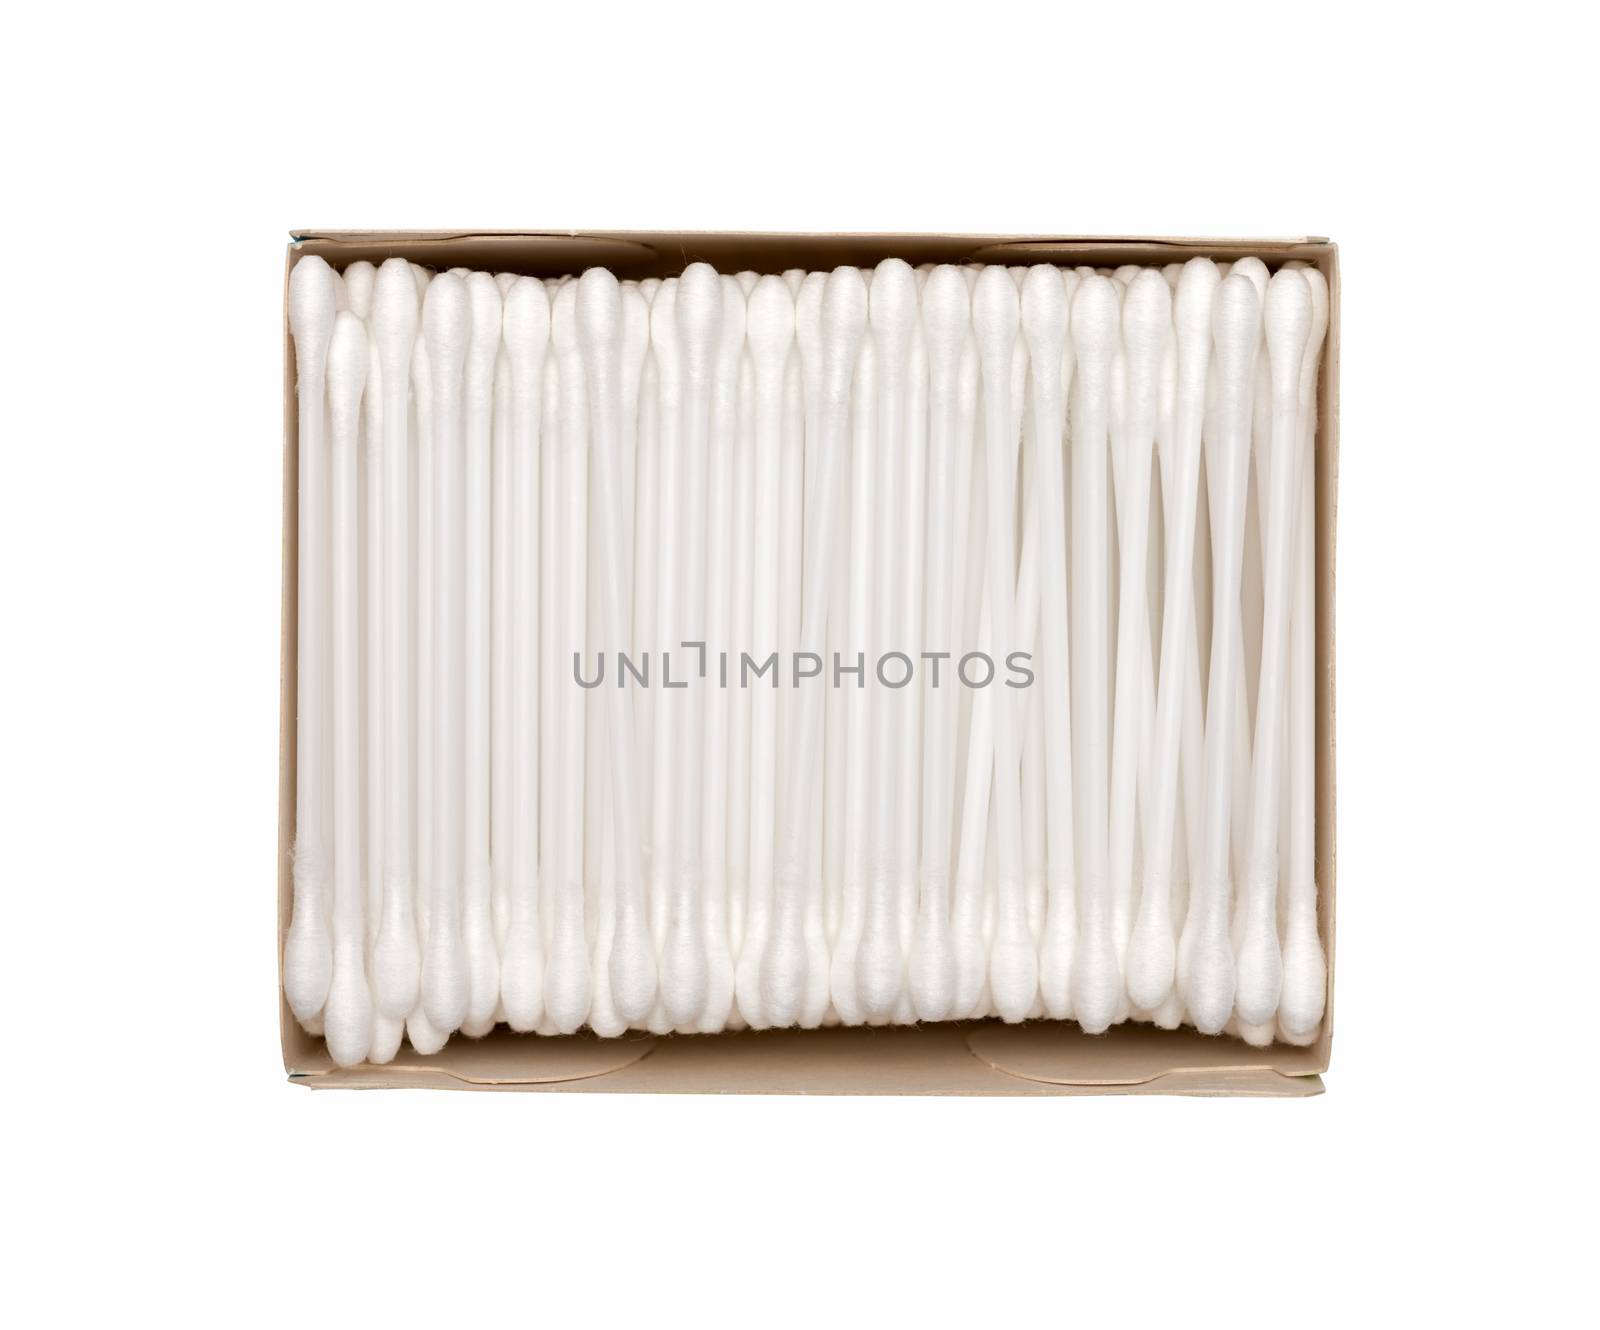 Cotton swab package for cleaning ear on white background by DNKSTUDIO